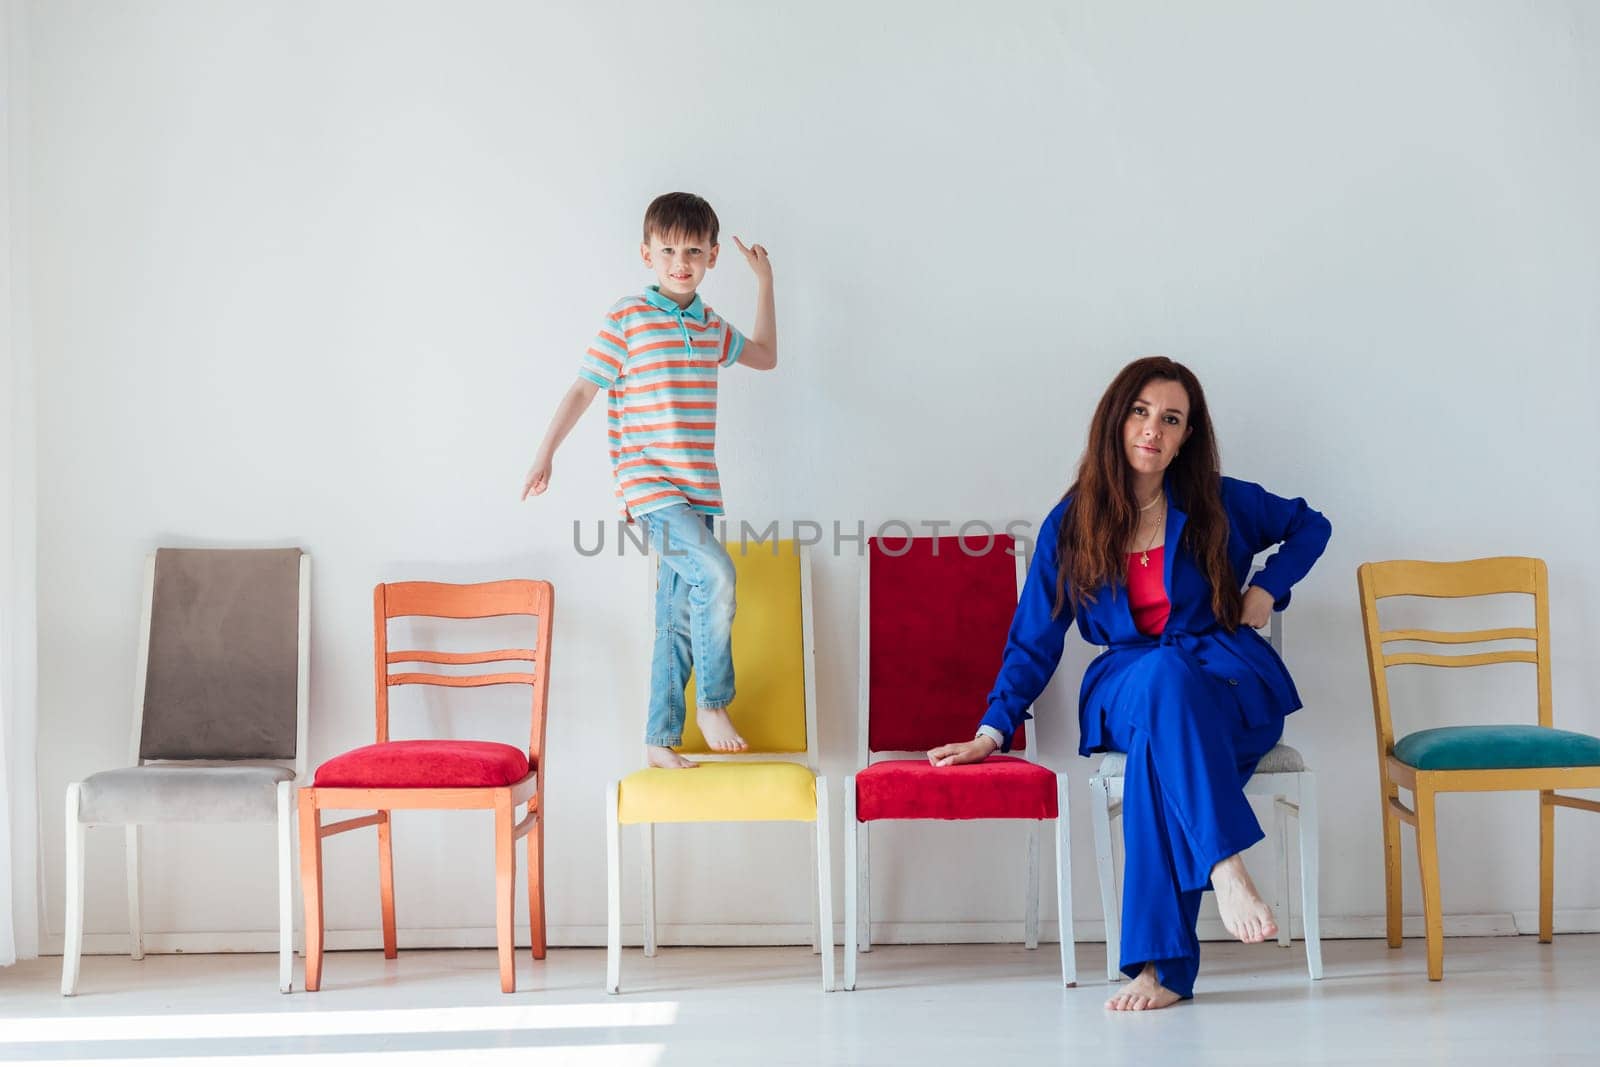 Boy and woman and many different chairs in the interior of a white room